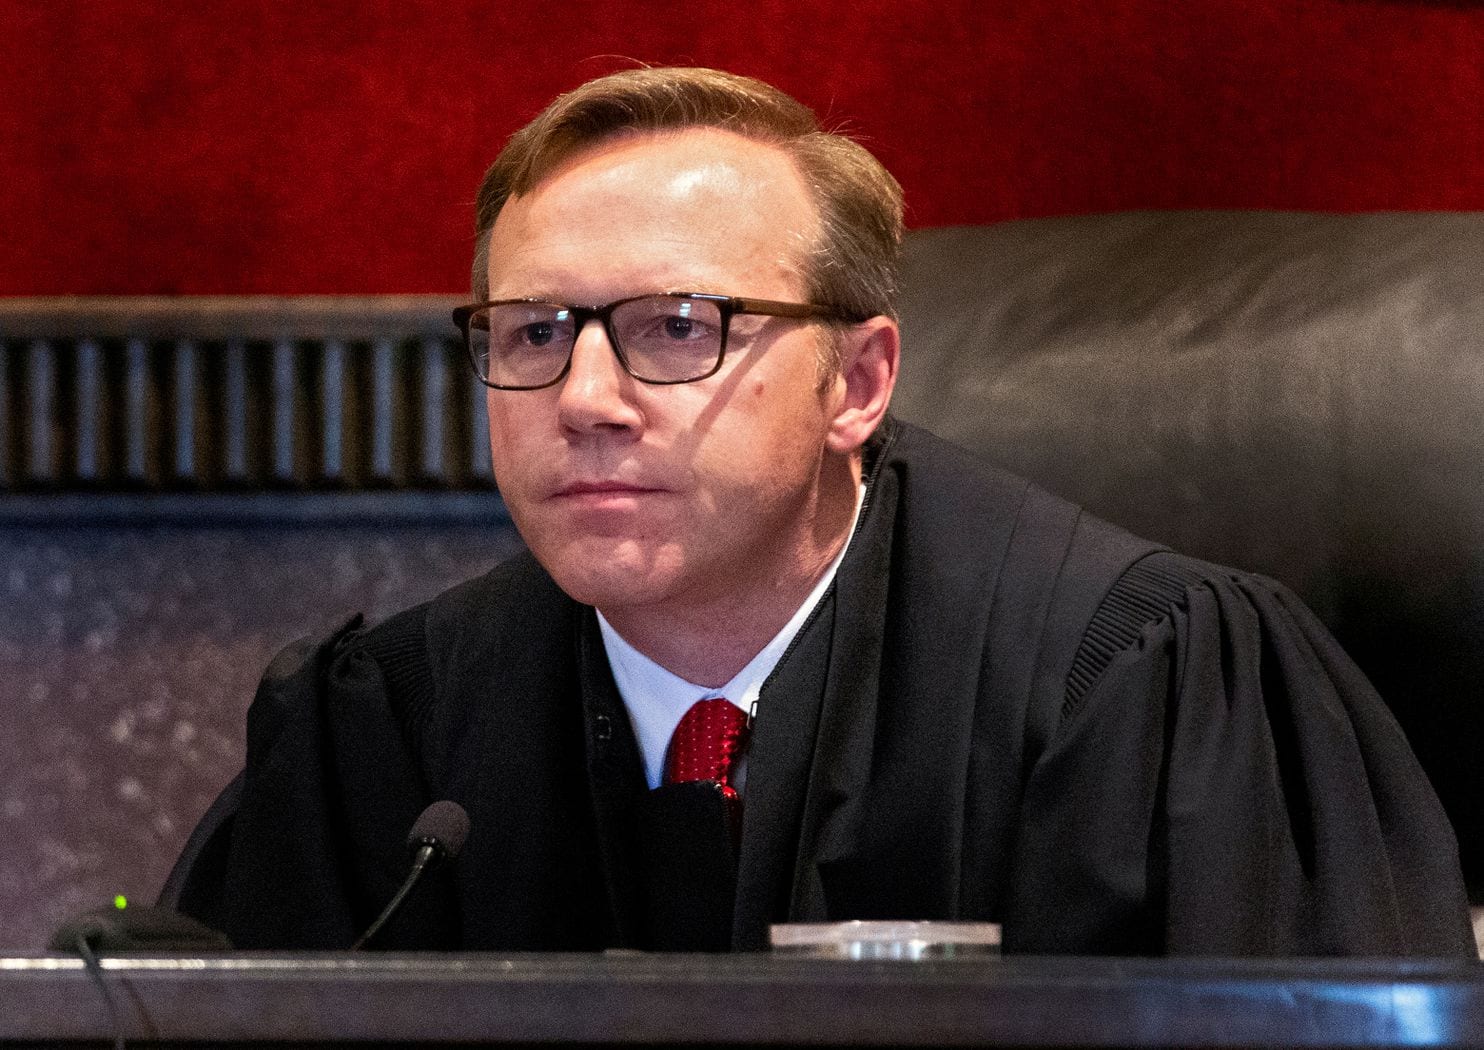 Judge expected to rule Monday in opioid case